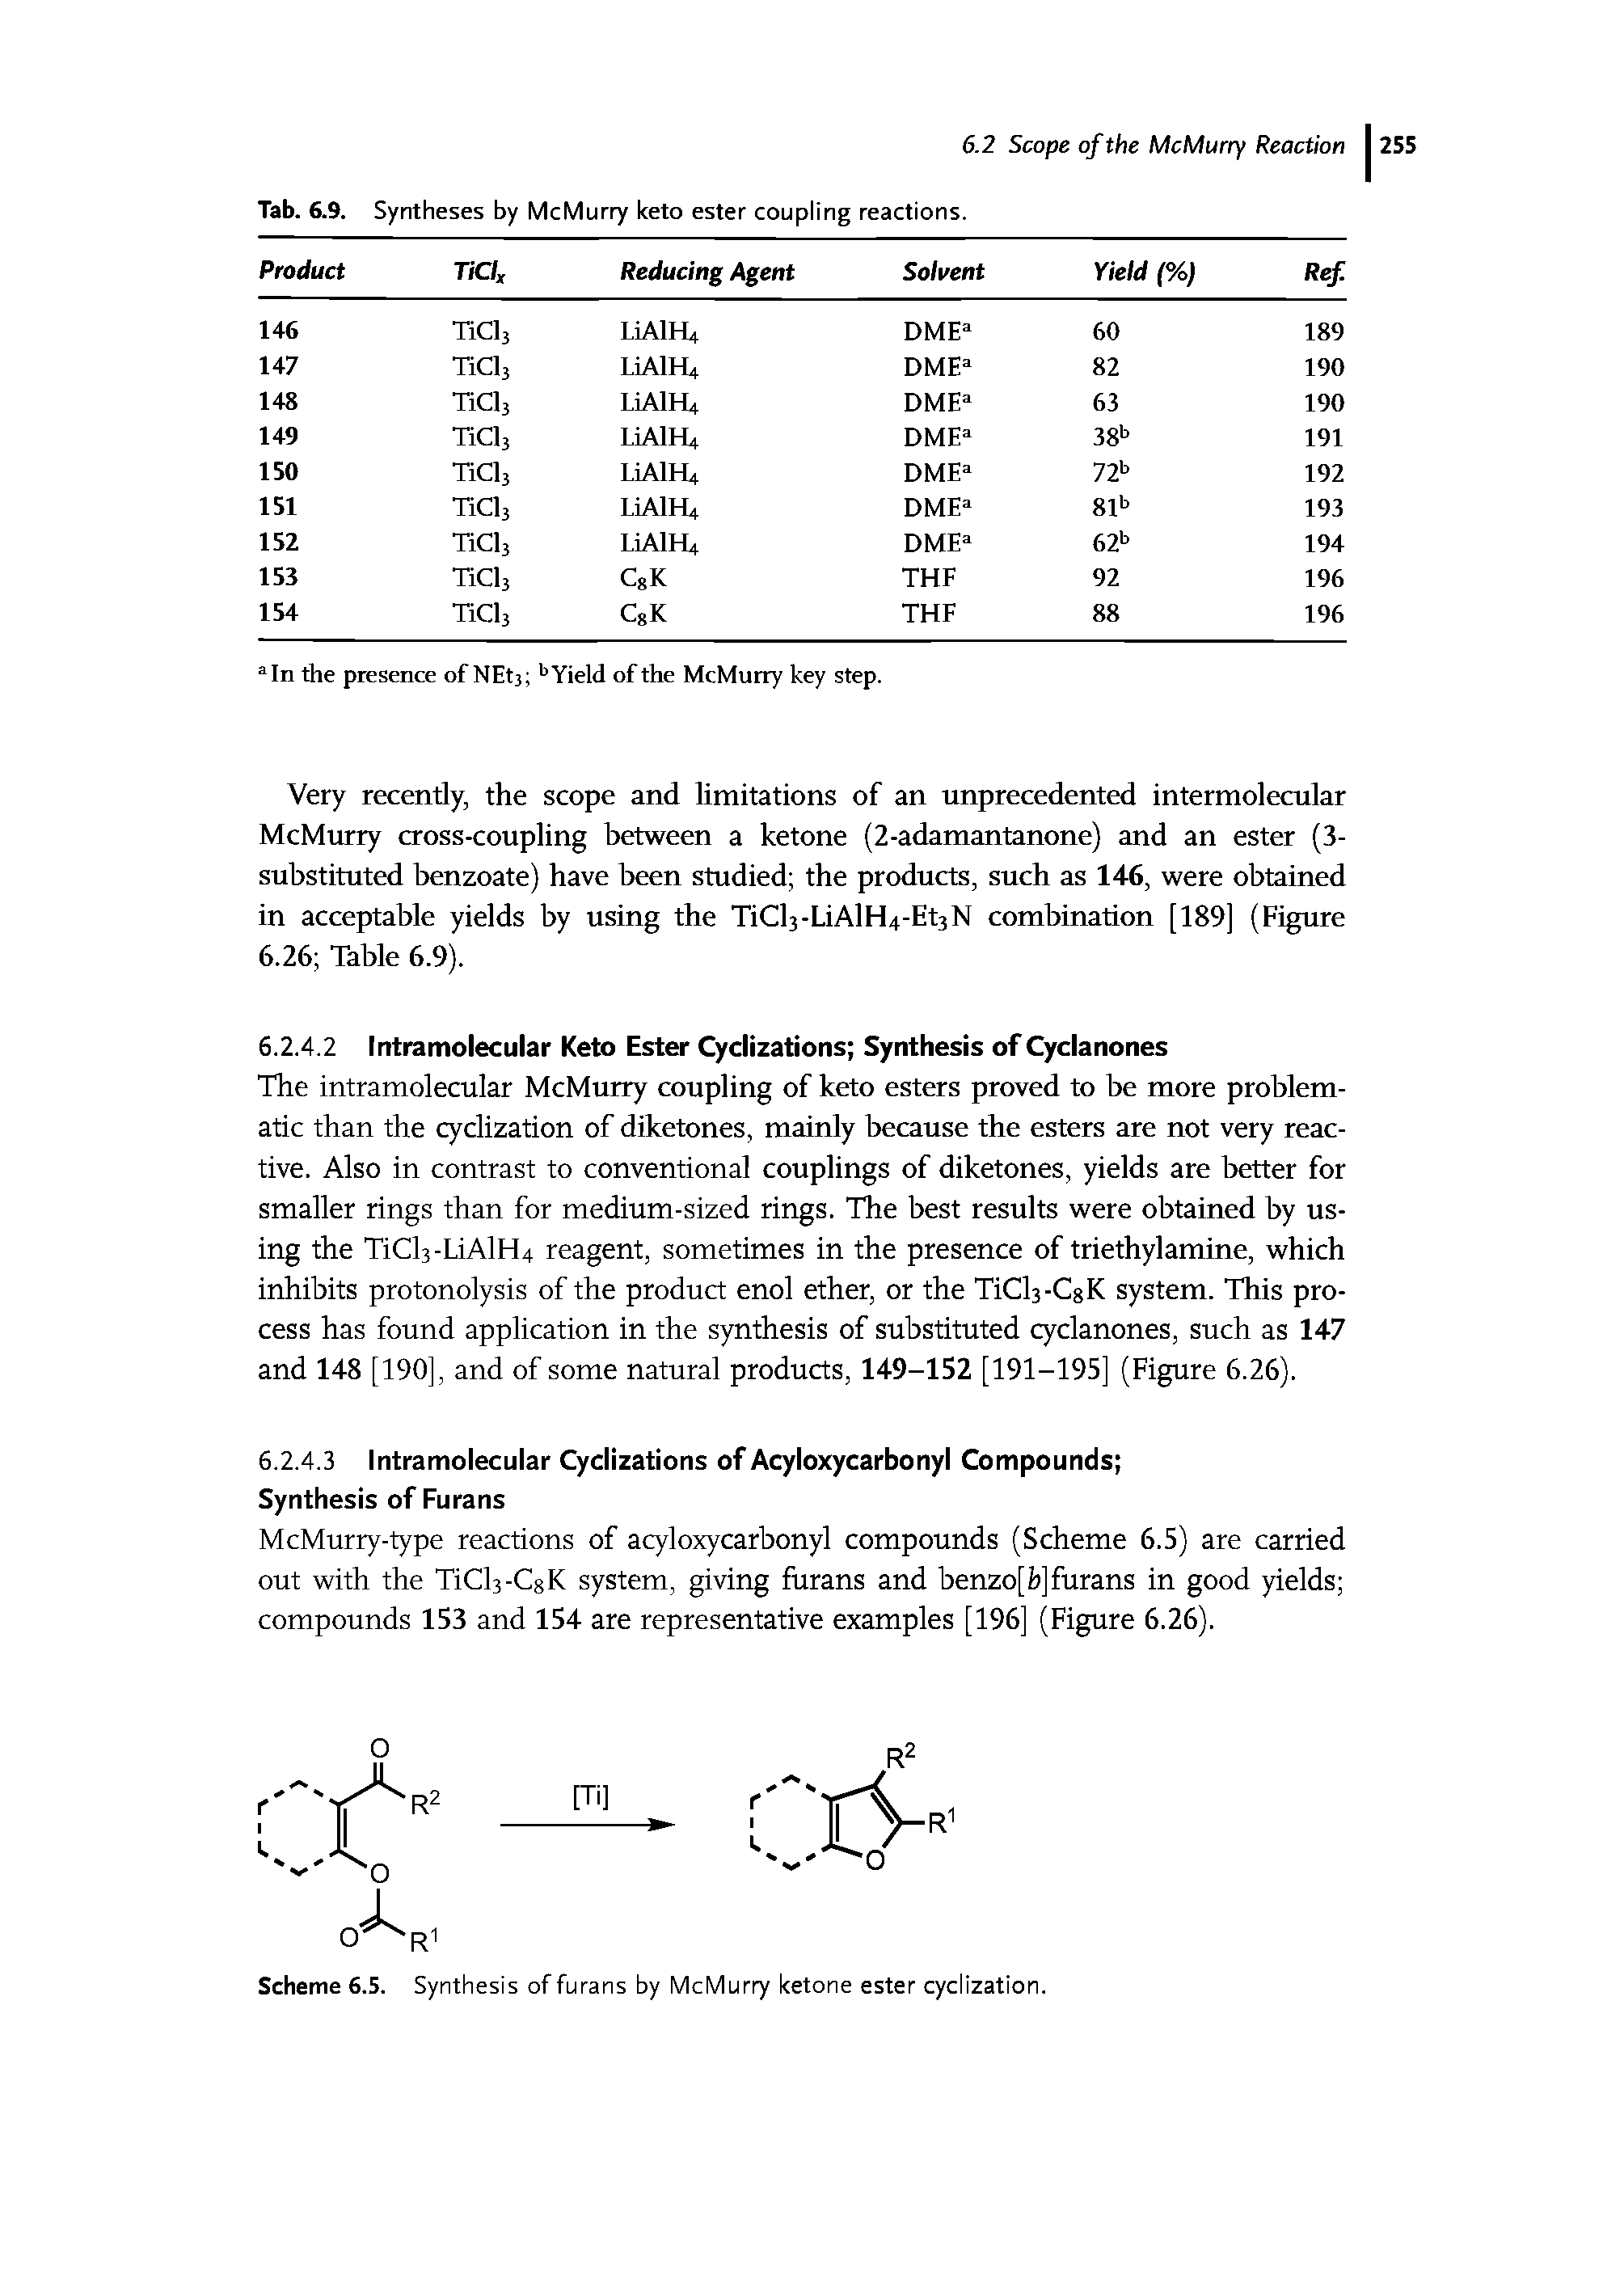 Tab. 6.9. Syntheses by McMurry keto ester coupling reactions.